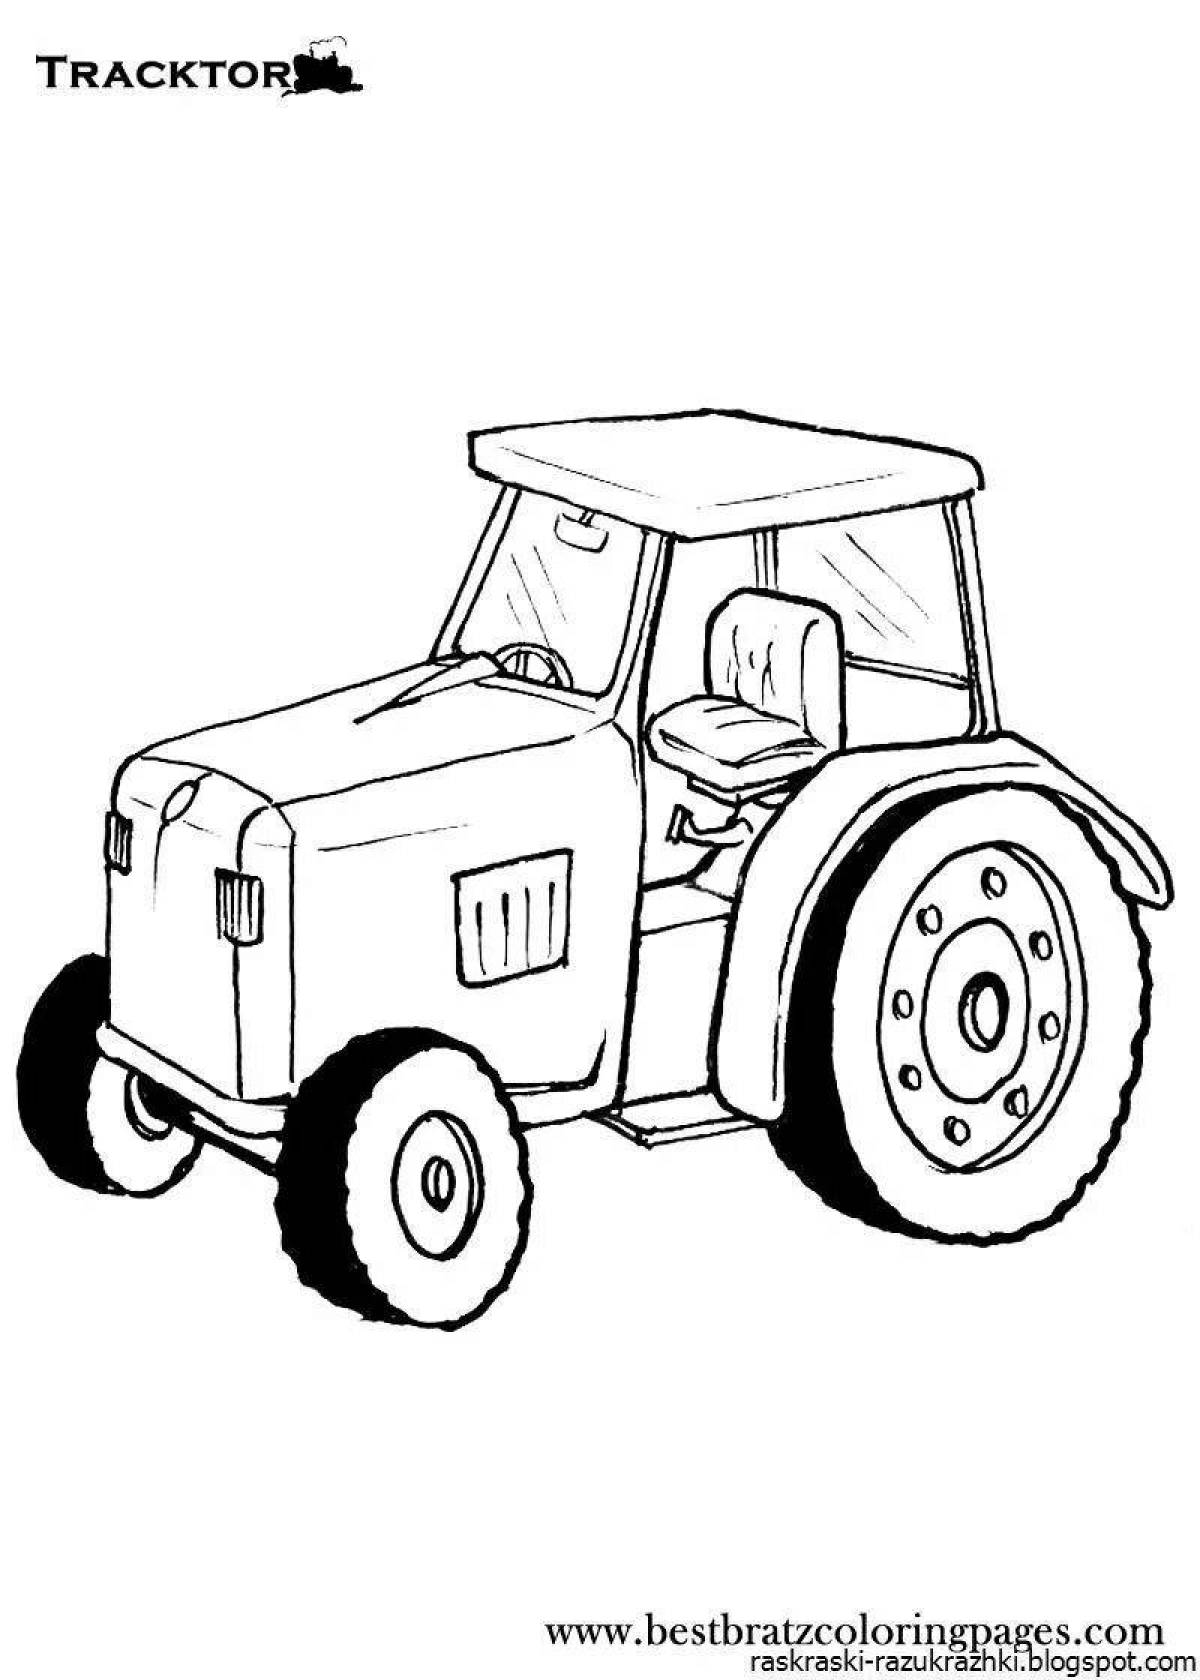 Unforgettable tractor coloring page